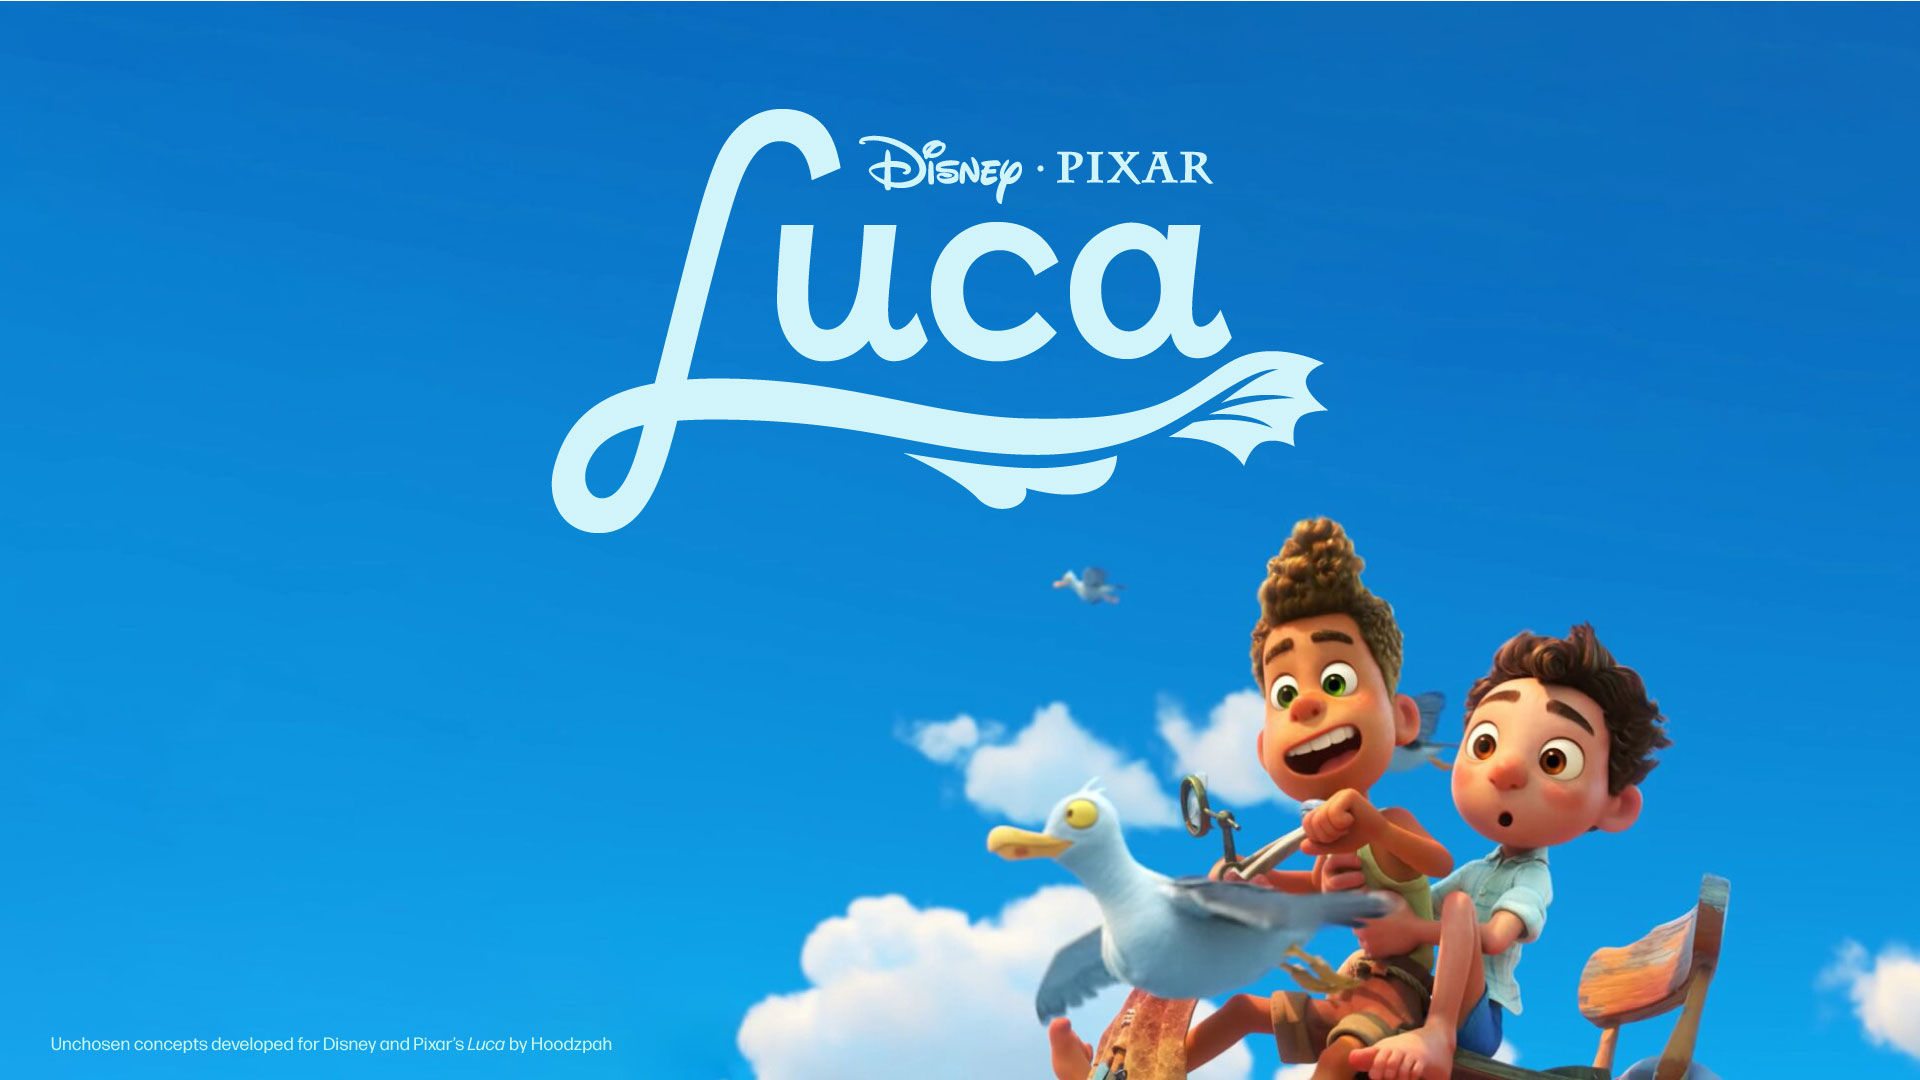 Title Treatment Concepts for Disney and Pixar's Luca - Hoodzpah % %